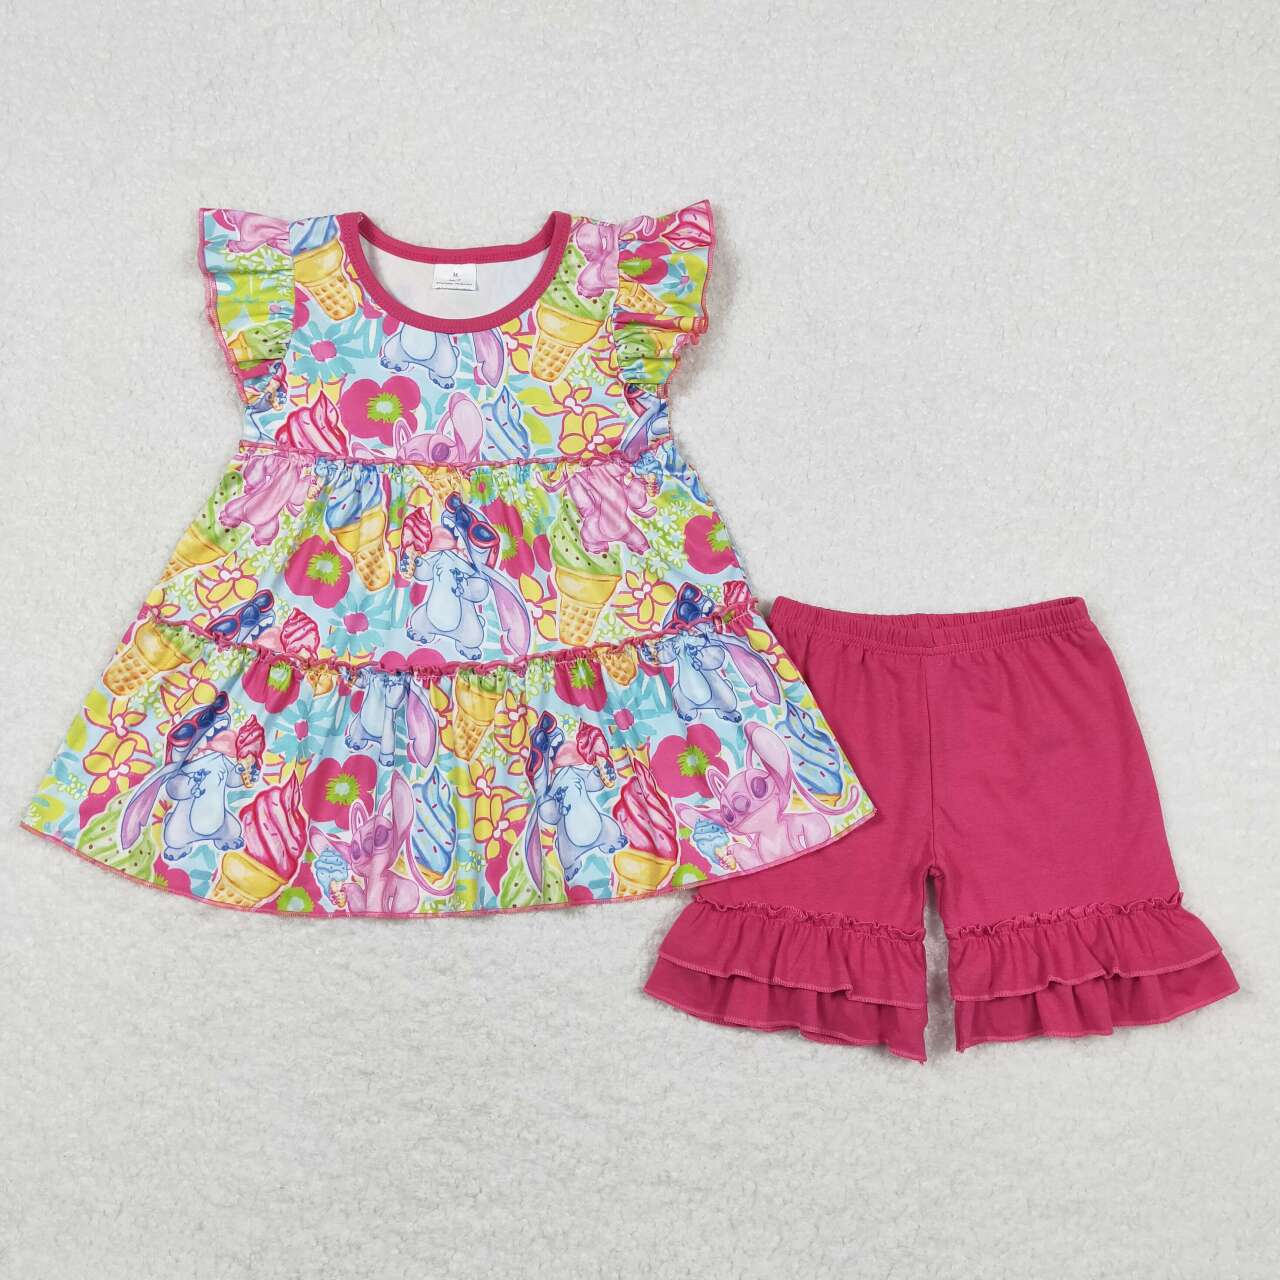 GT0471+ 	 SS0178 Kids Girls summer clothes short sleeve top with shorts set